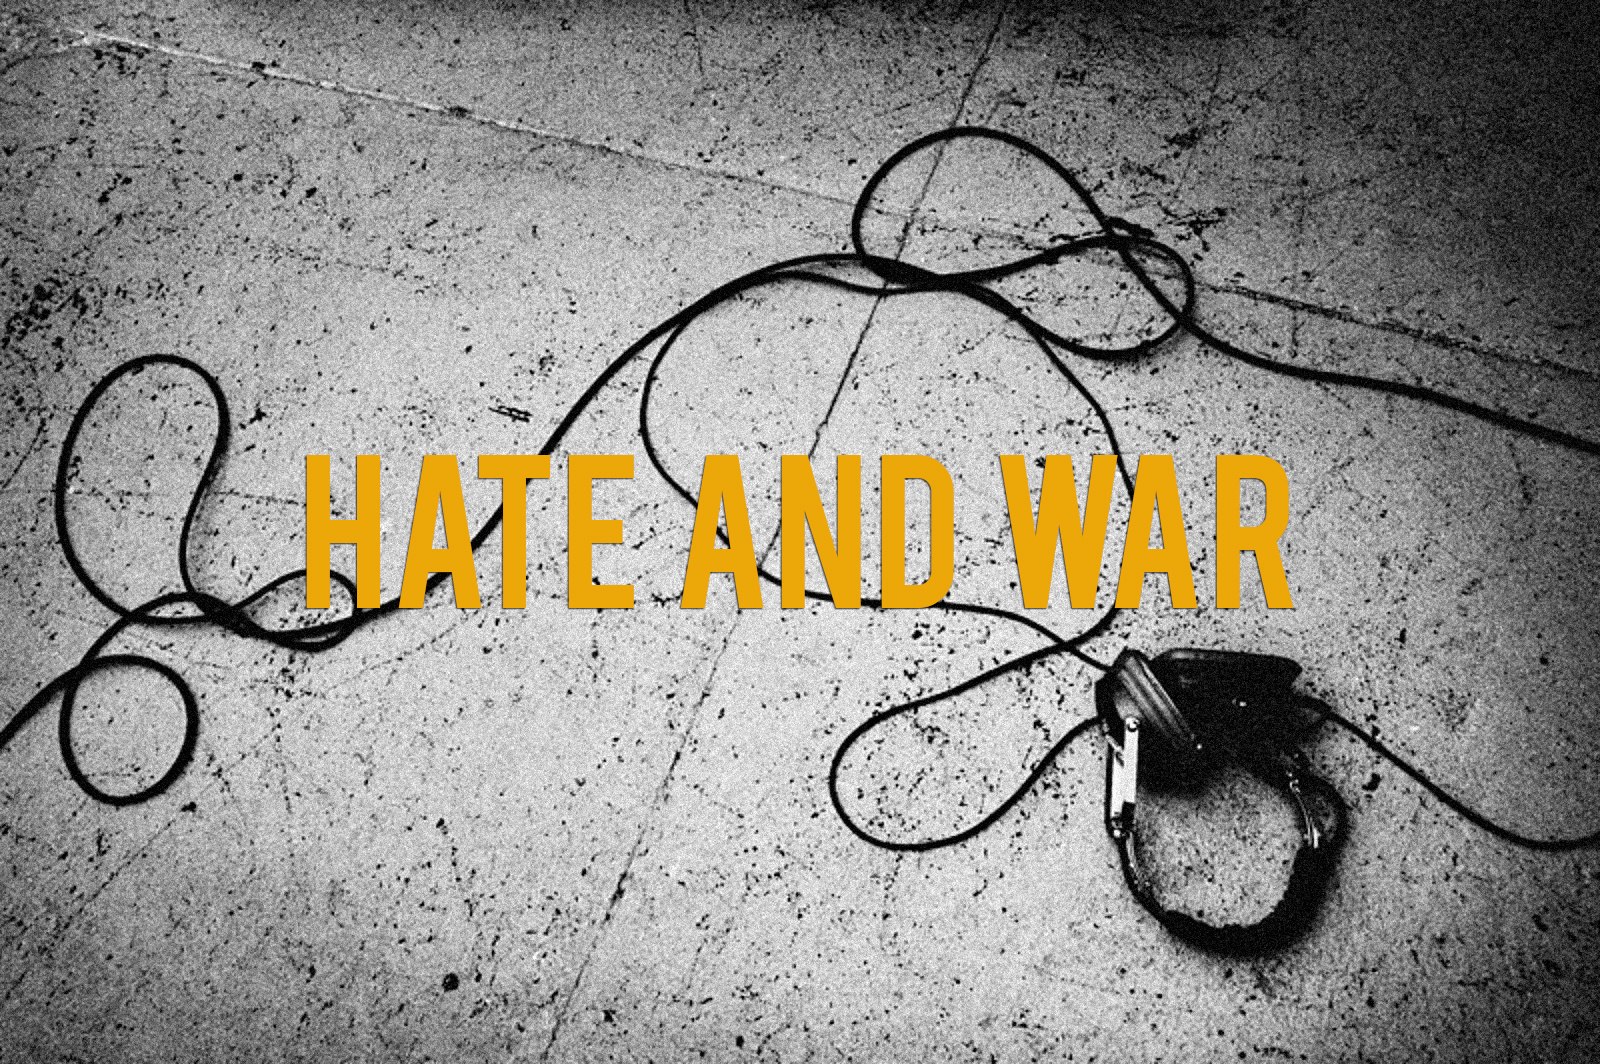 Hate And War